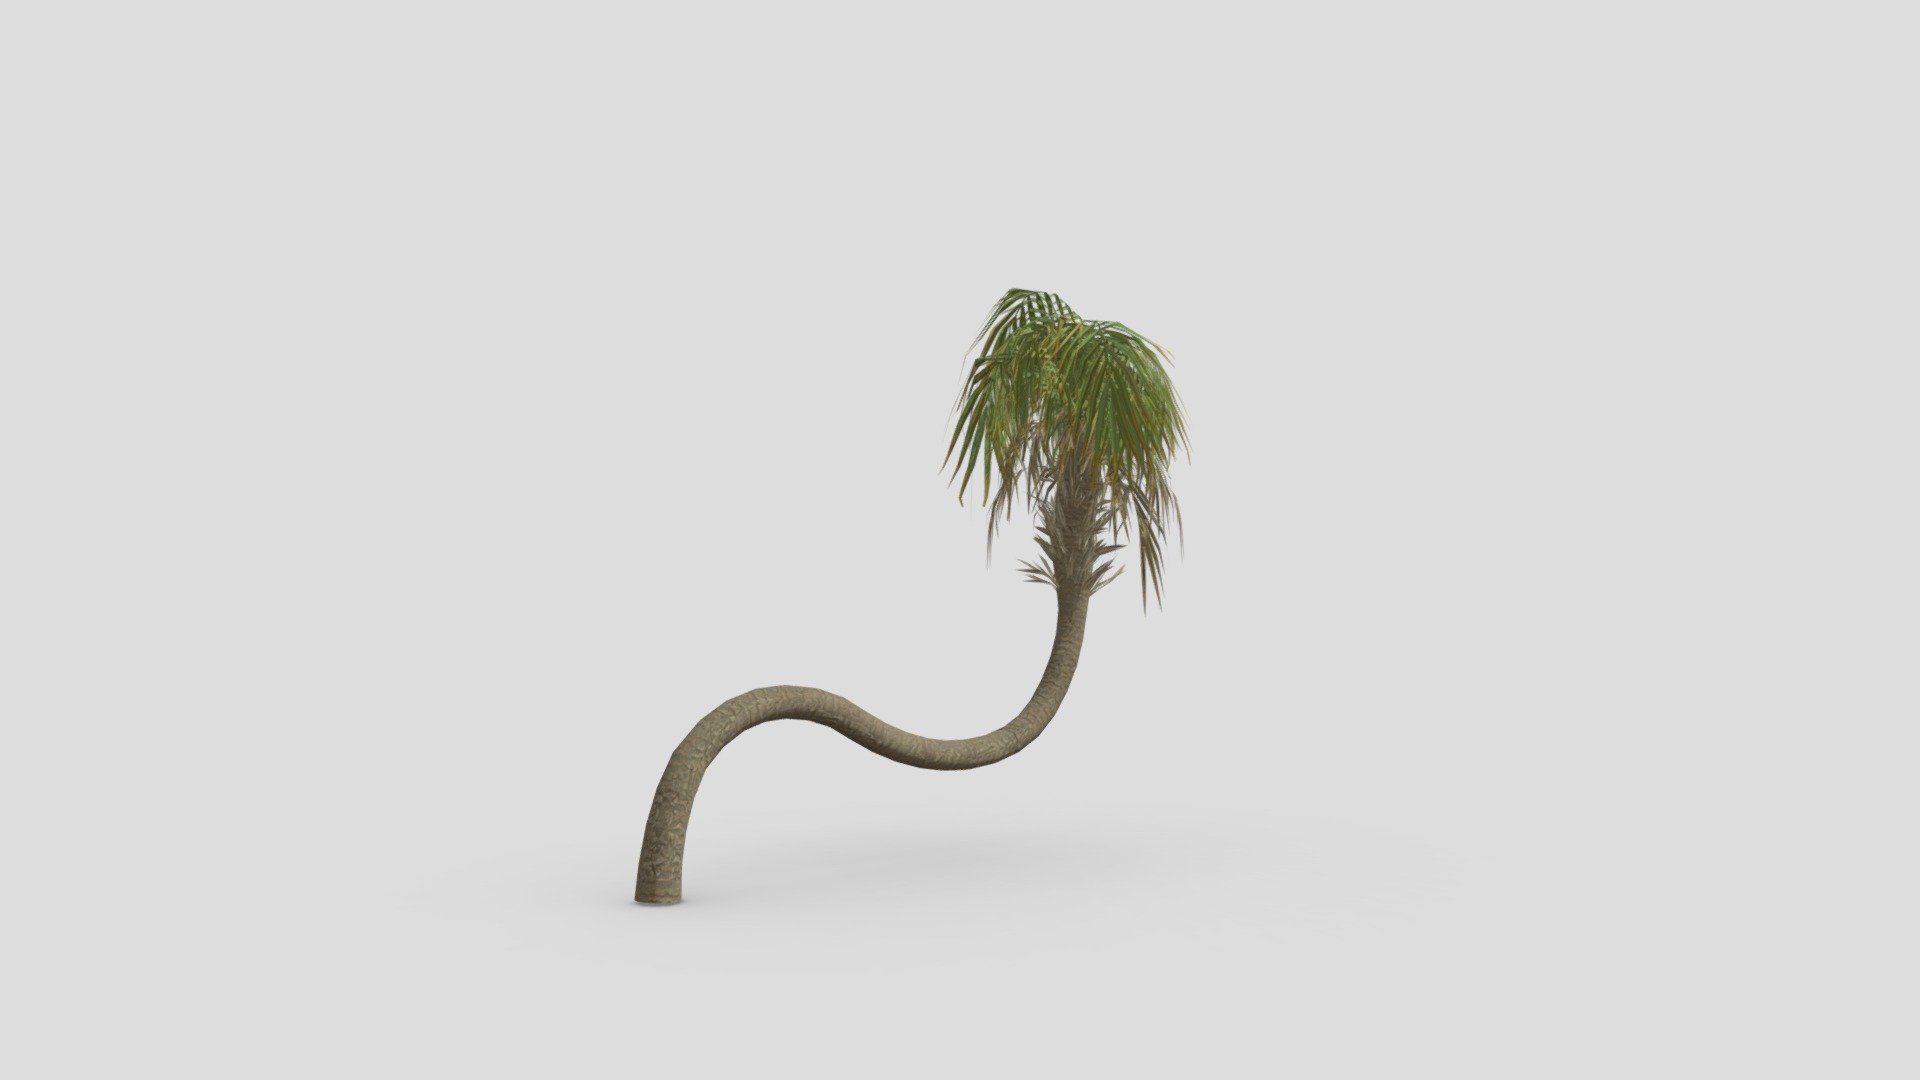 The Arecaceae are a botanical family of perennial flowering plants in the monocot order Arecales. Their growth form can be climbers, shrubs, tree-like and stemless plants, all commonly known as palms. Those having a tree-like form are colloquially called palm trees 3d model